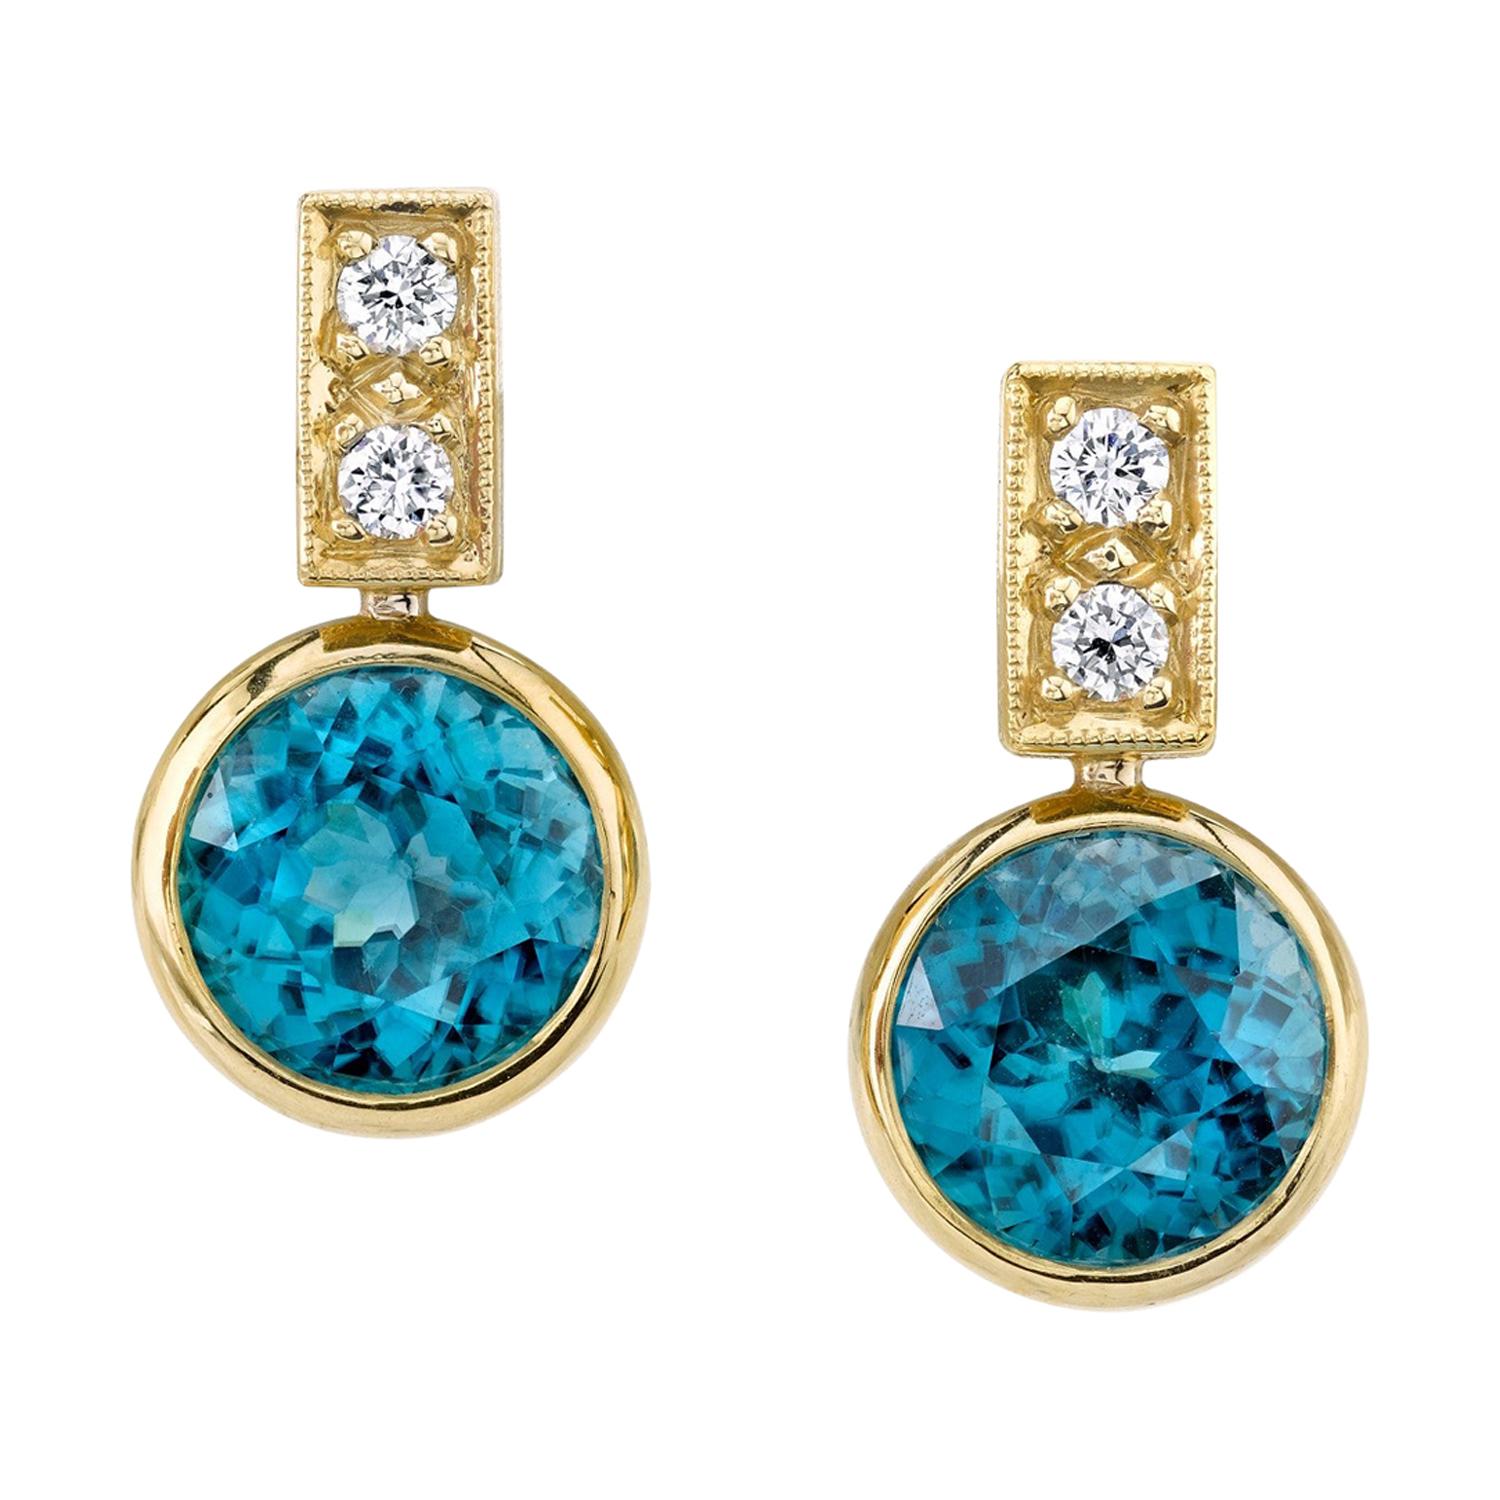 Blue Zircon and Diamond Drop Earrings in 18K Yellow Gold, 9.64 Carats Total